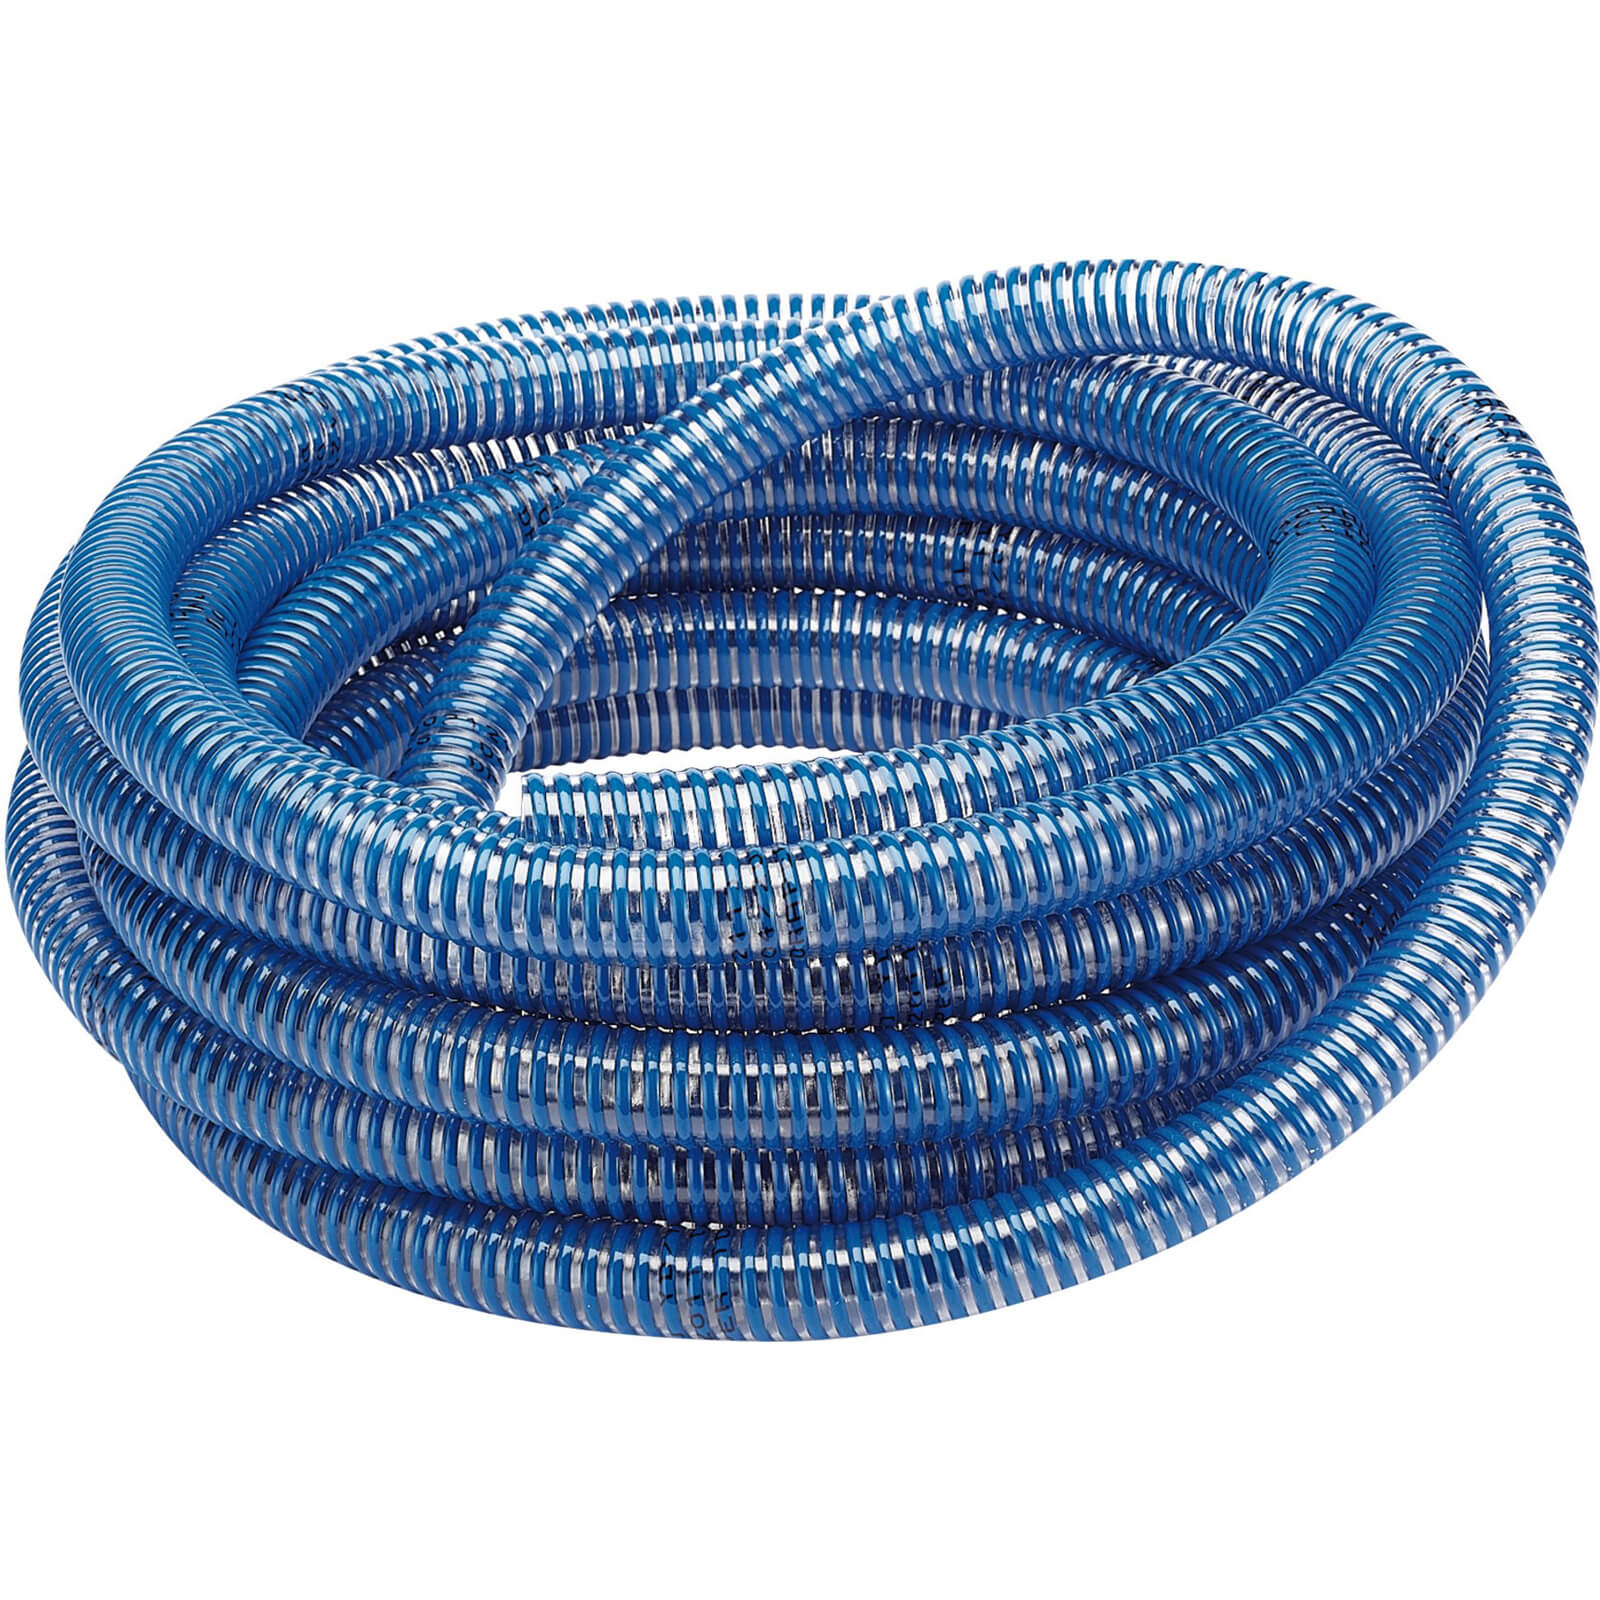 Image of Draper Solid Wall PVC Suction Hose 25mm 10m